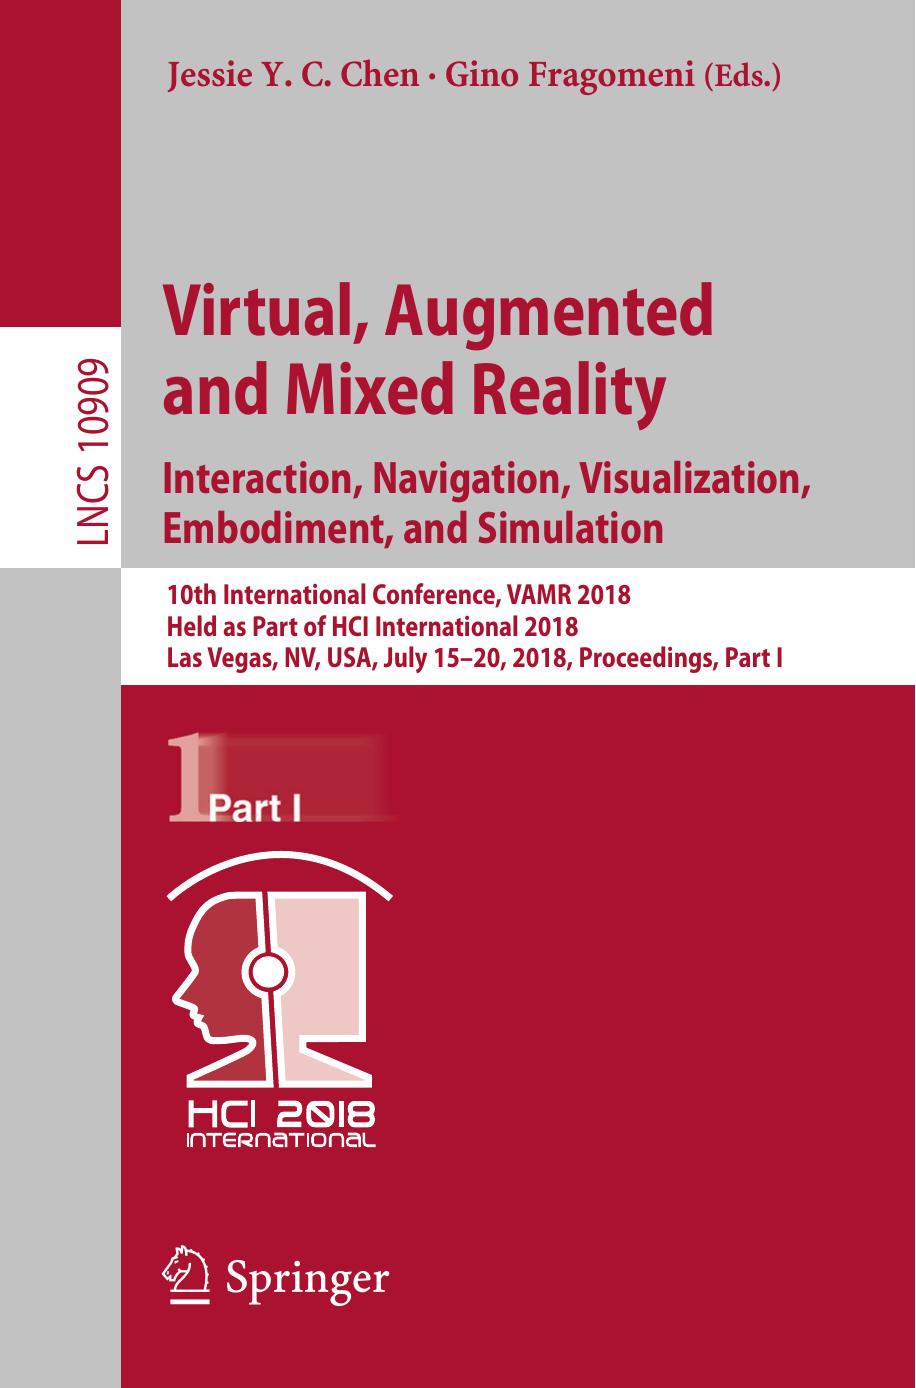 Virtual, Augmented and Mixed Reality: Design and Development